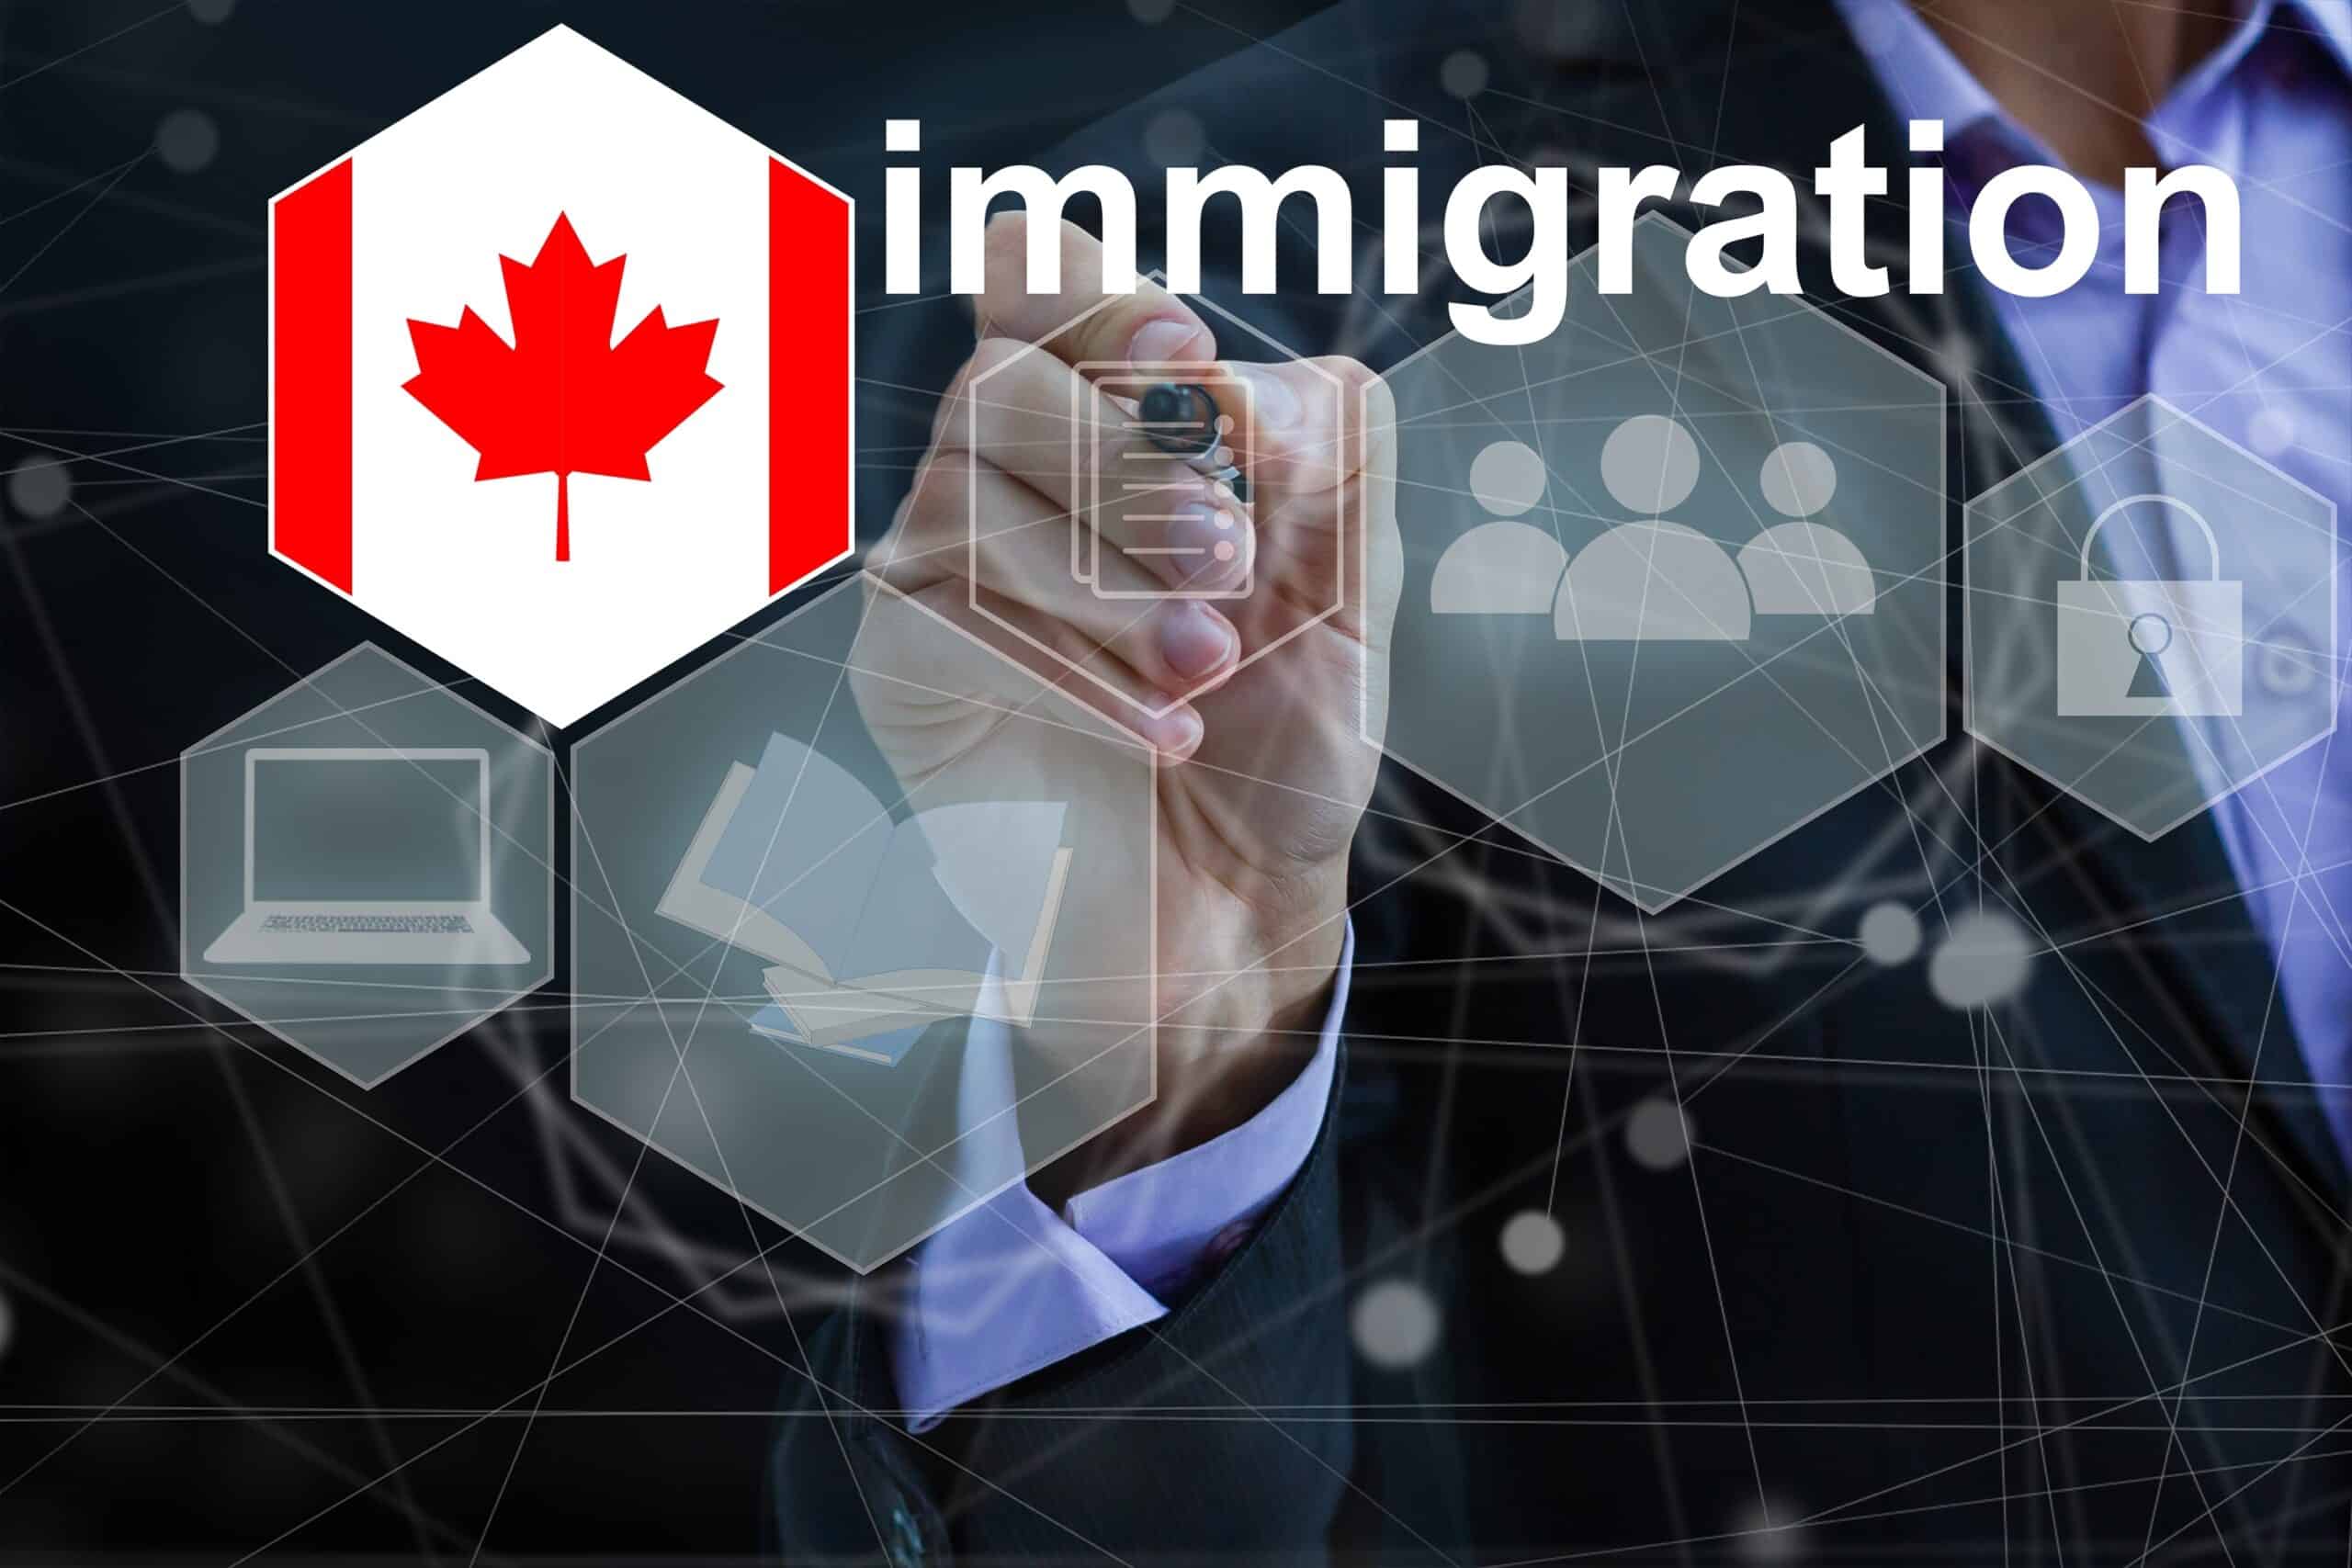 More Job Market Help Needed For New Immigrants to Canada